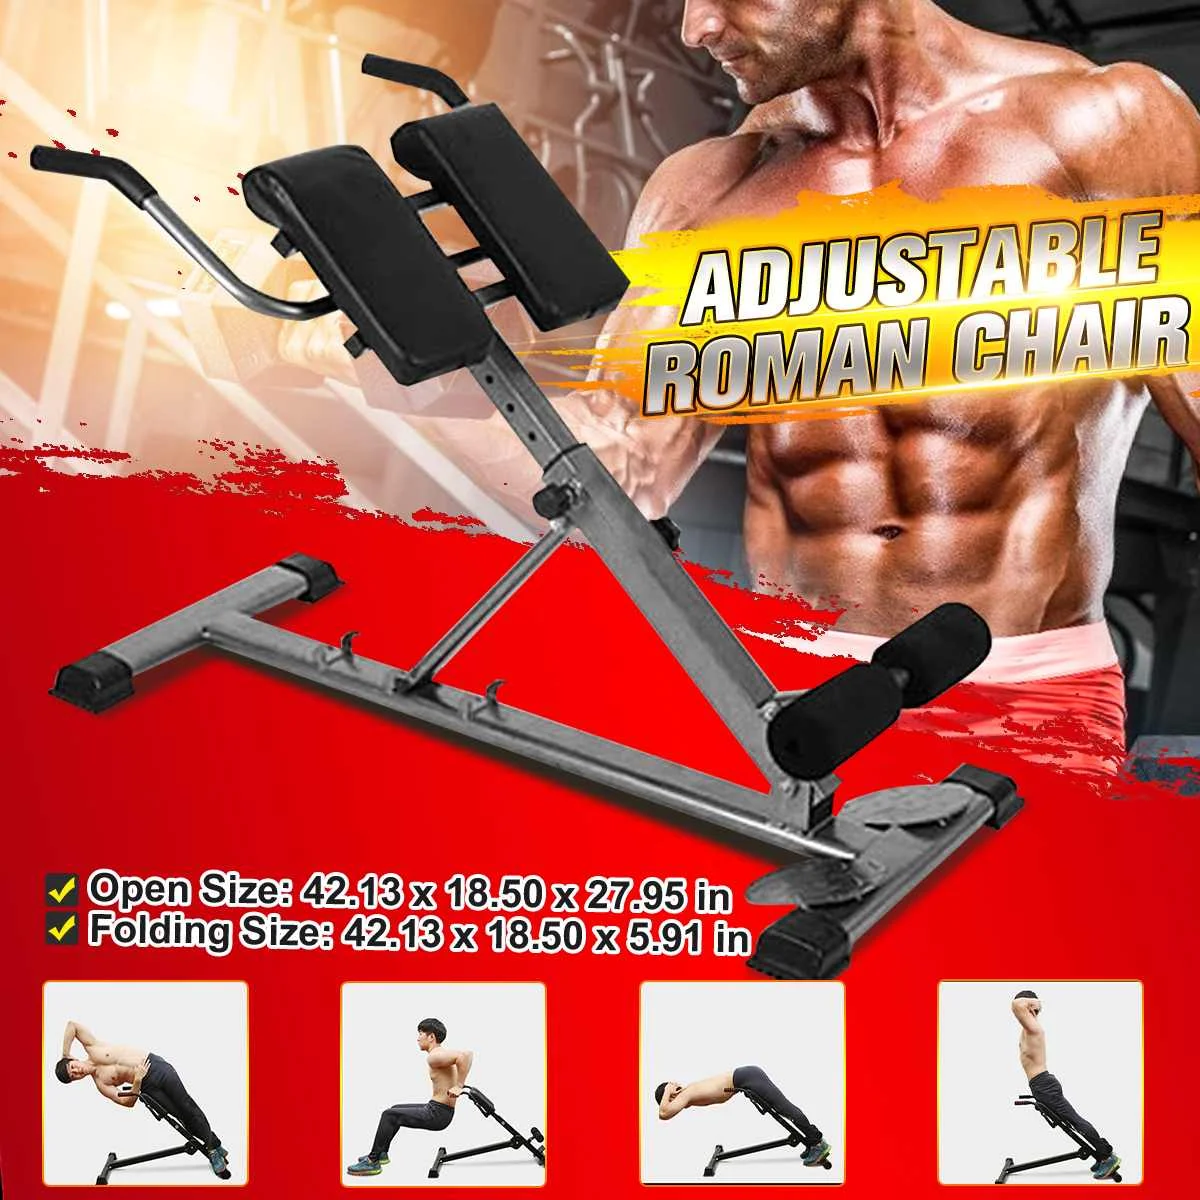 Adjustable Roman Chair Training Bench Back Extension Abs Training Gym Fitness Equipment for Home Gym Max Load 150kg